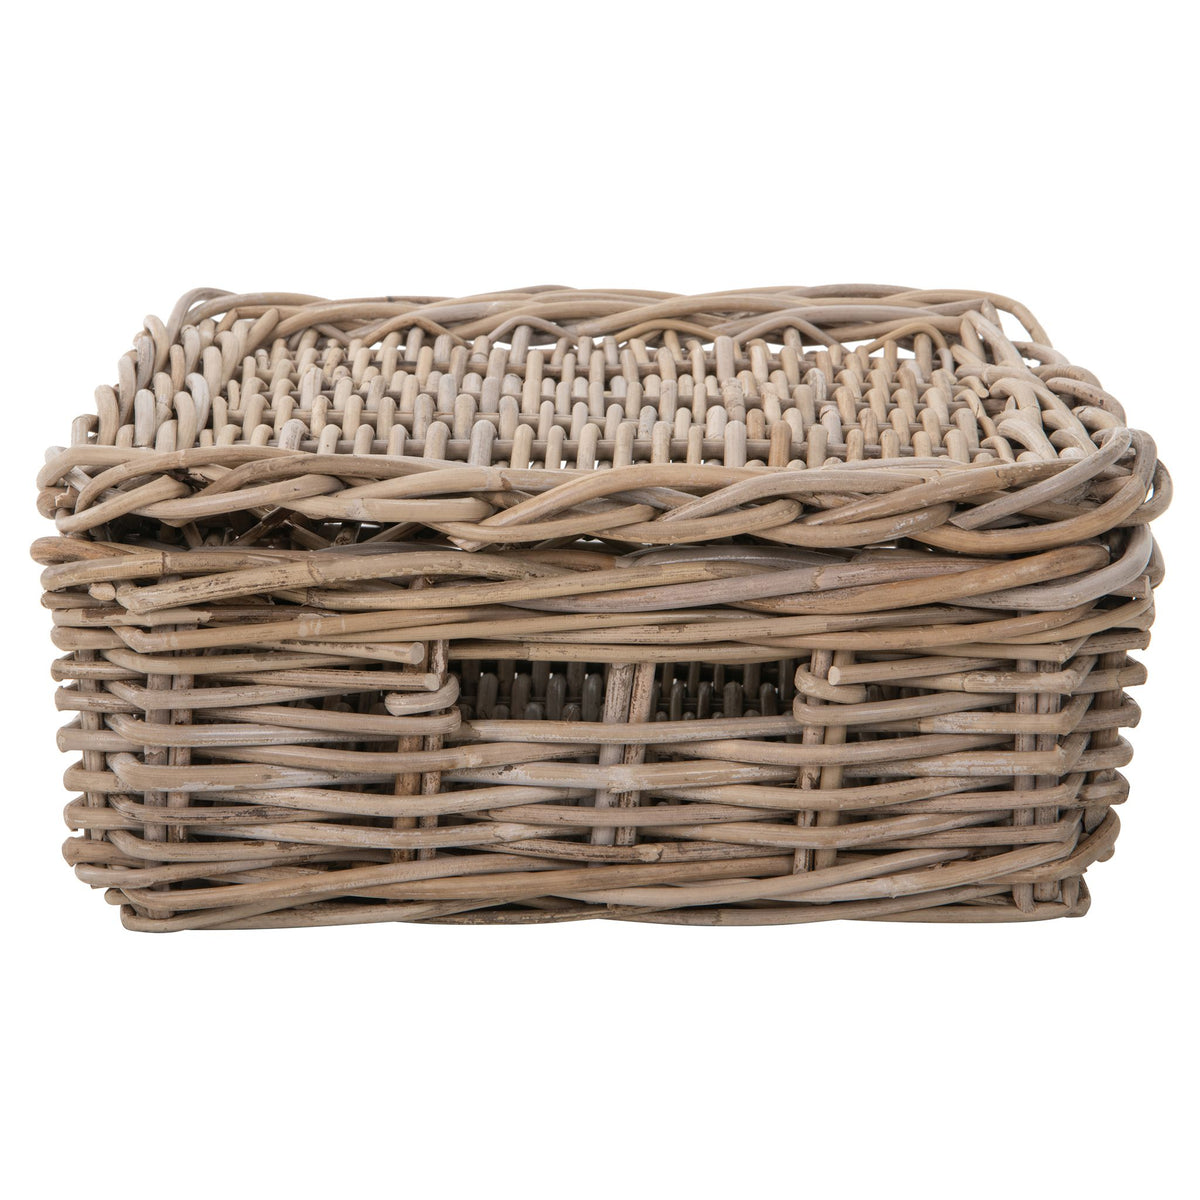 Rattan Kobo Decorative Storage Trunk with Lid, Natural